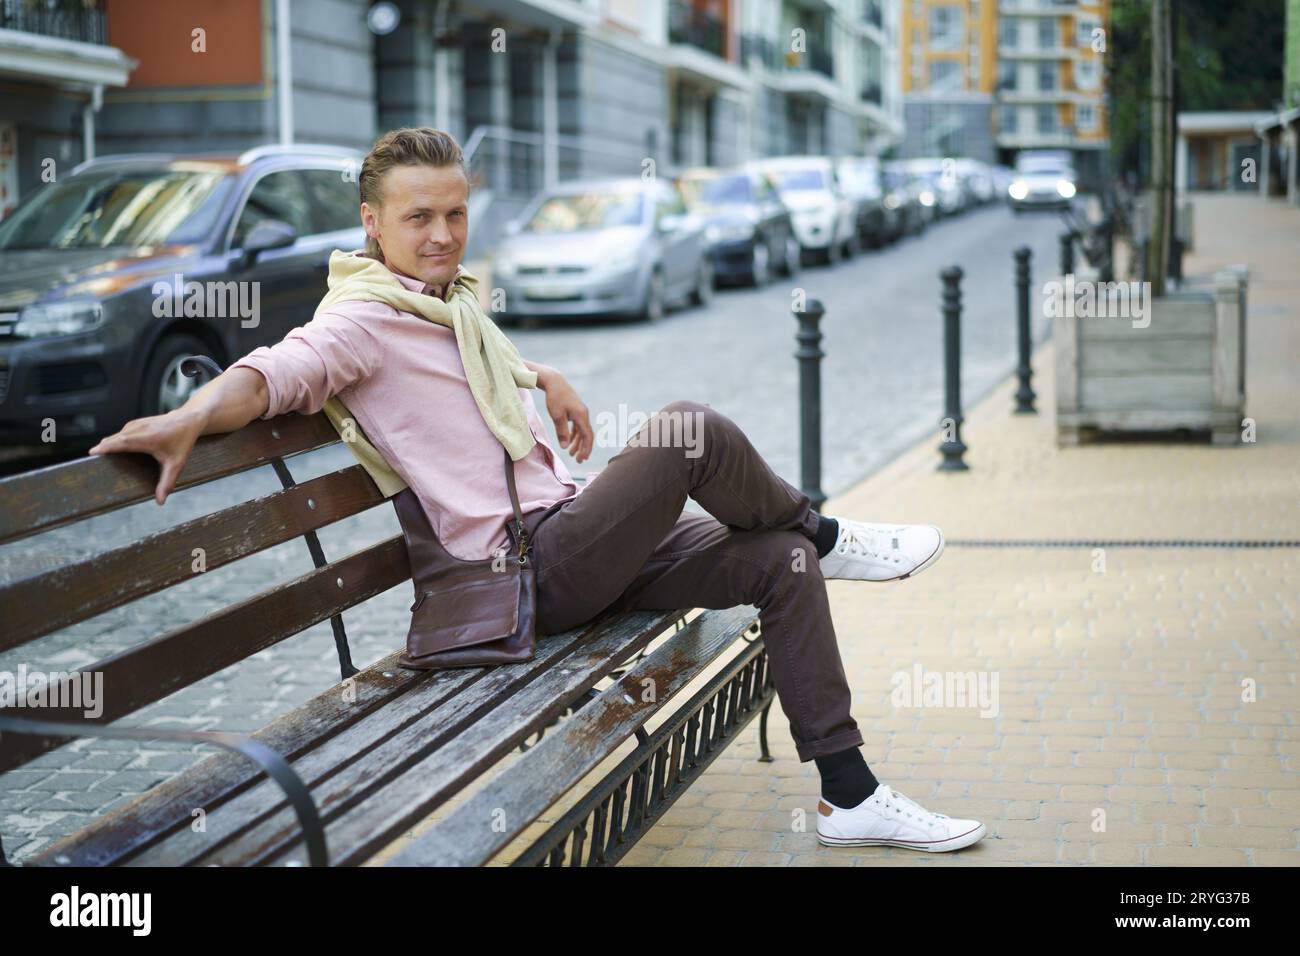 Handsome man sits on the bench with legs crossed spend time in urban city near his office or home, wearing pink shirt and should Stock Photo